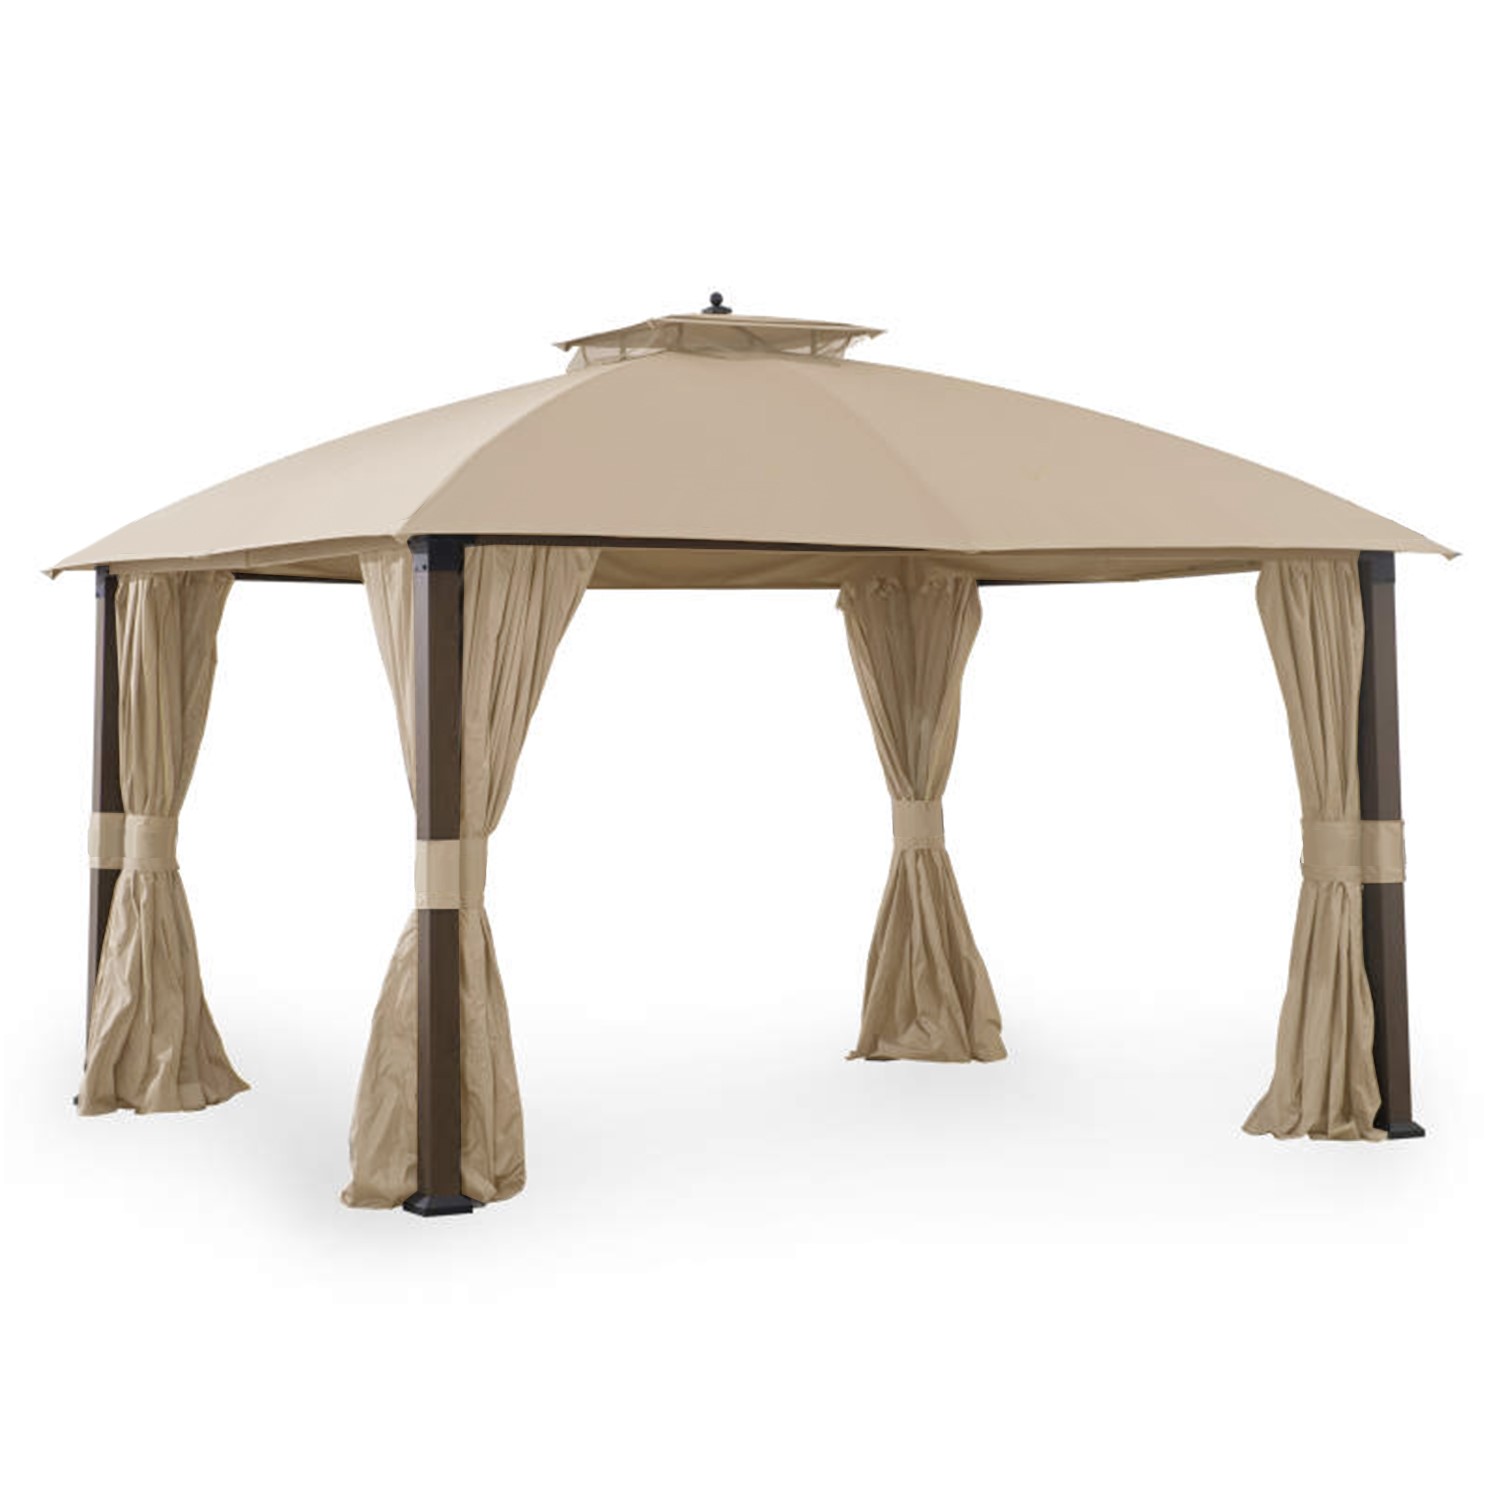 Replacement Canopy for Broyhill Eagle Brooke Gazebo - 350